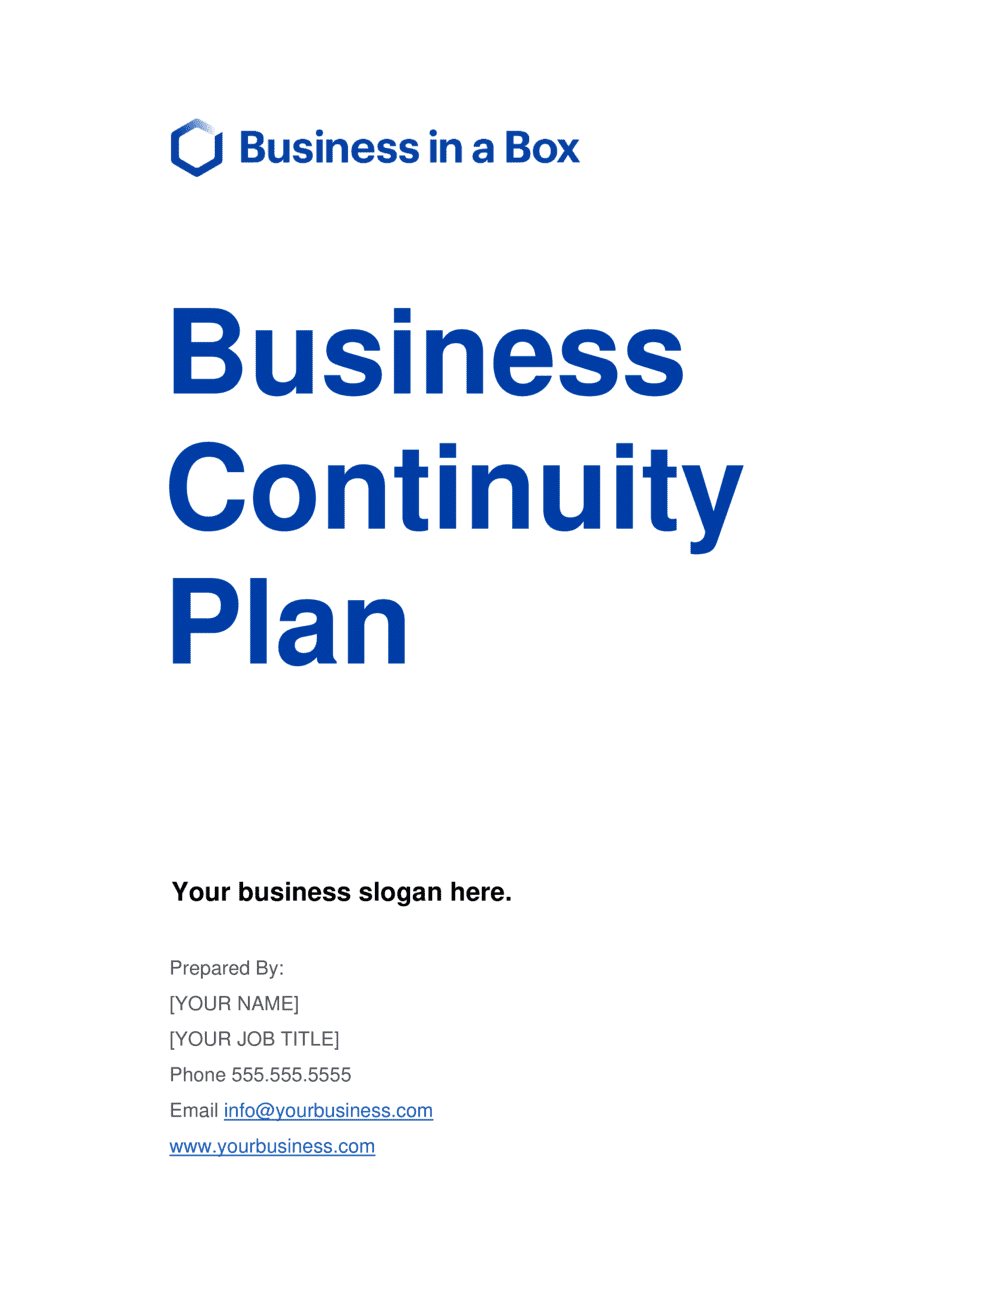 Business Continuity Plan Template  by Business-in-a-Box™ For Business Continuity Plan Template Australia